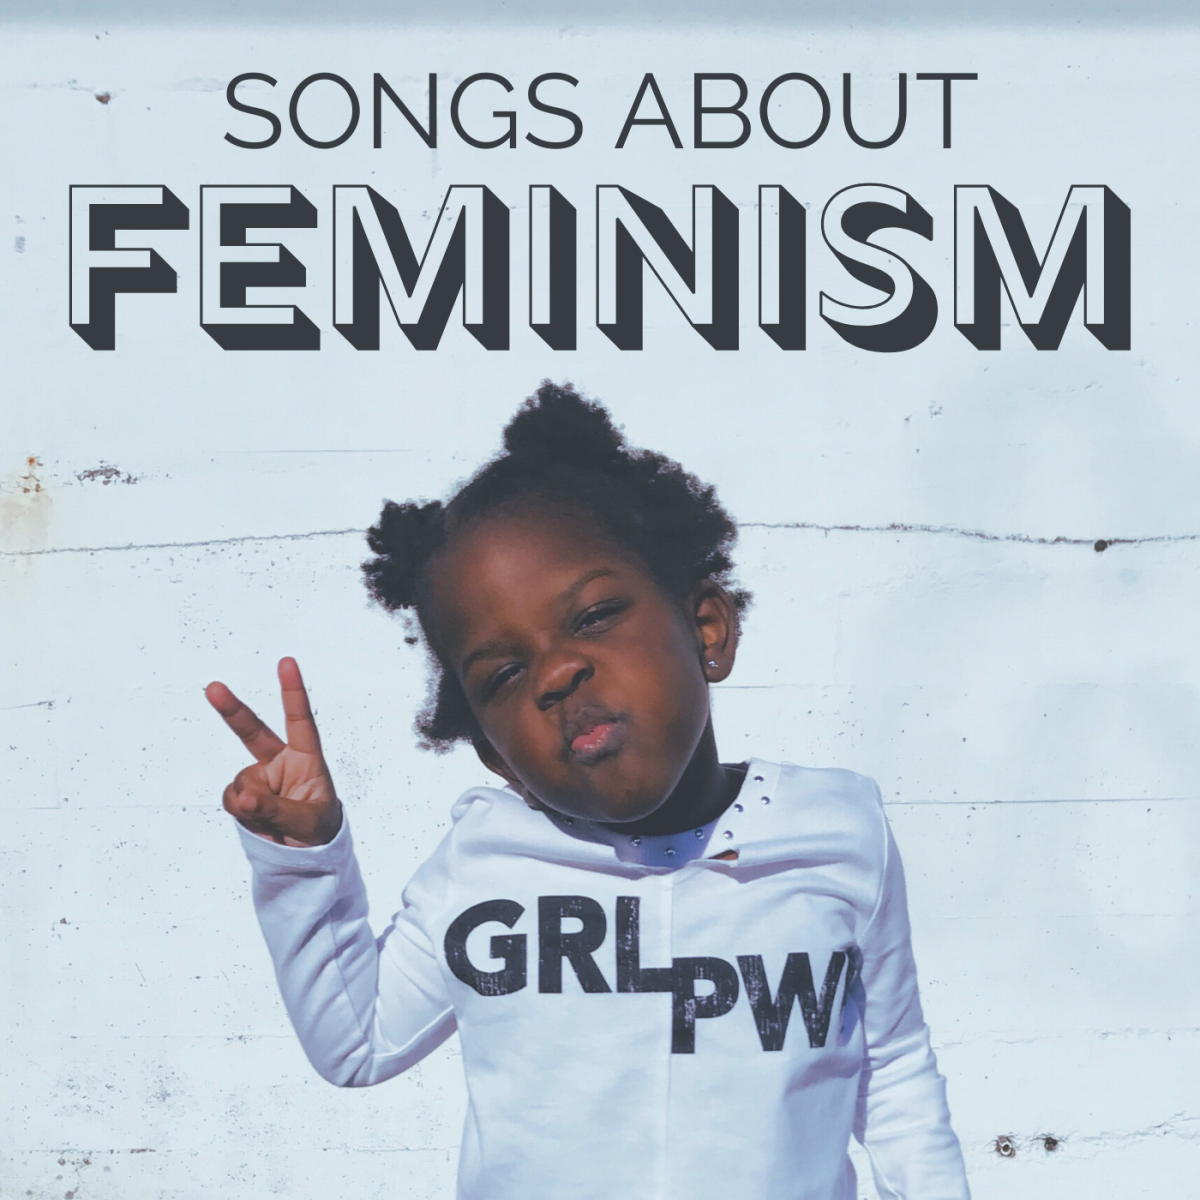 Celebrate girl power with these songs that feature feminist themes.